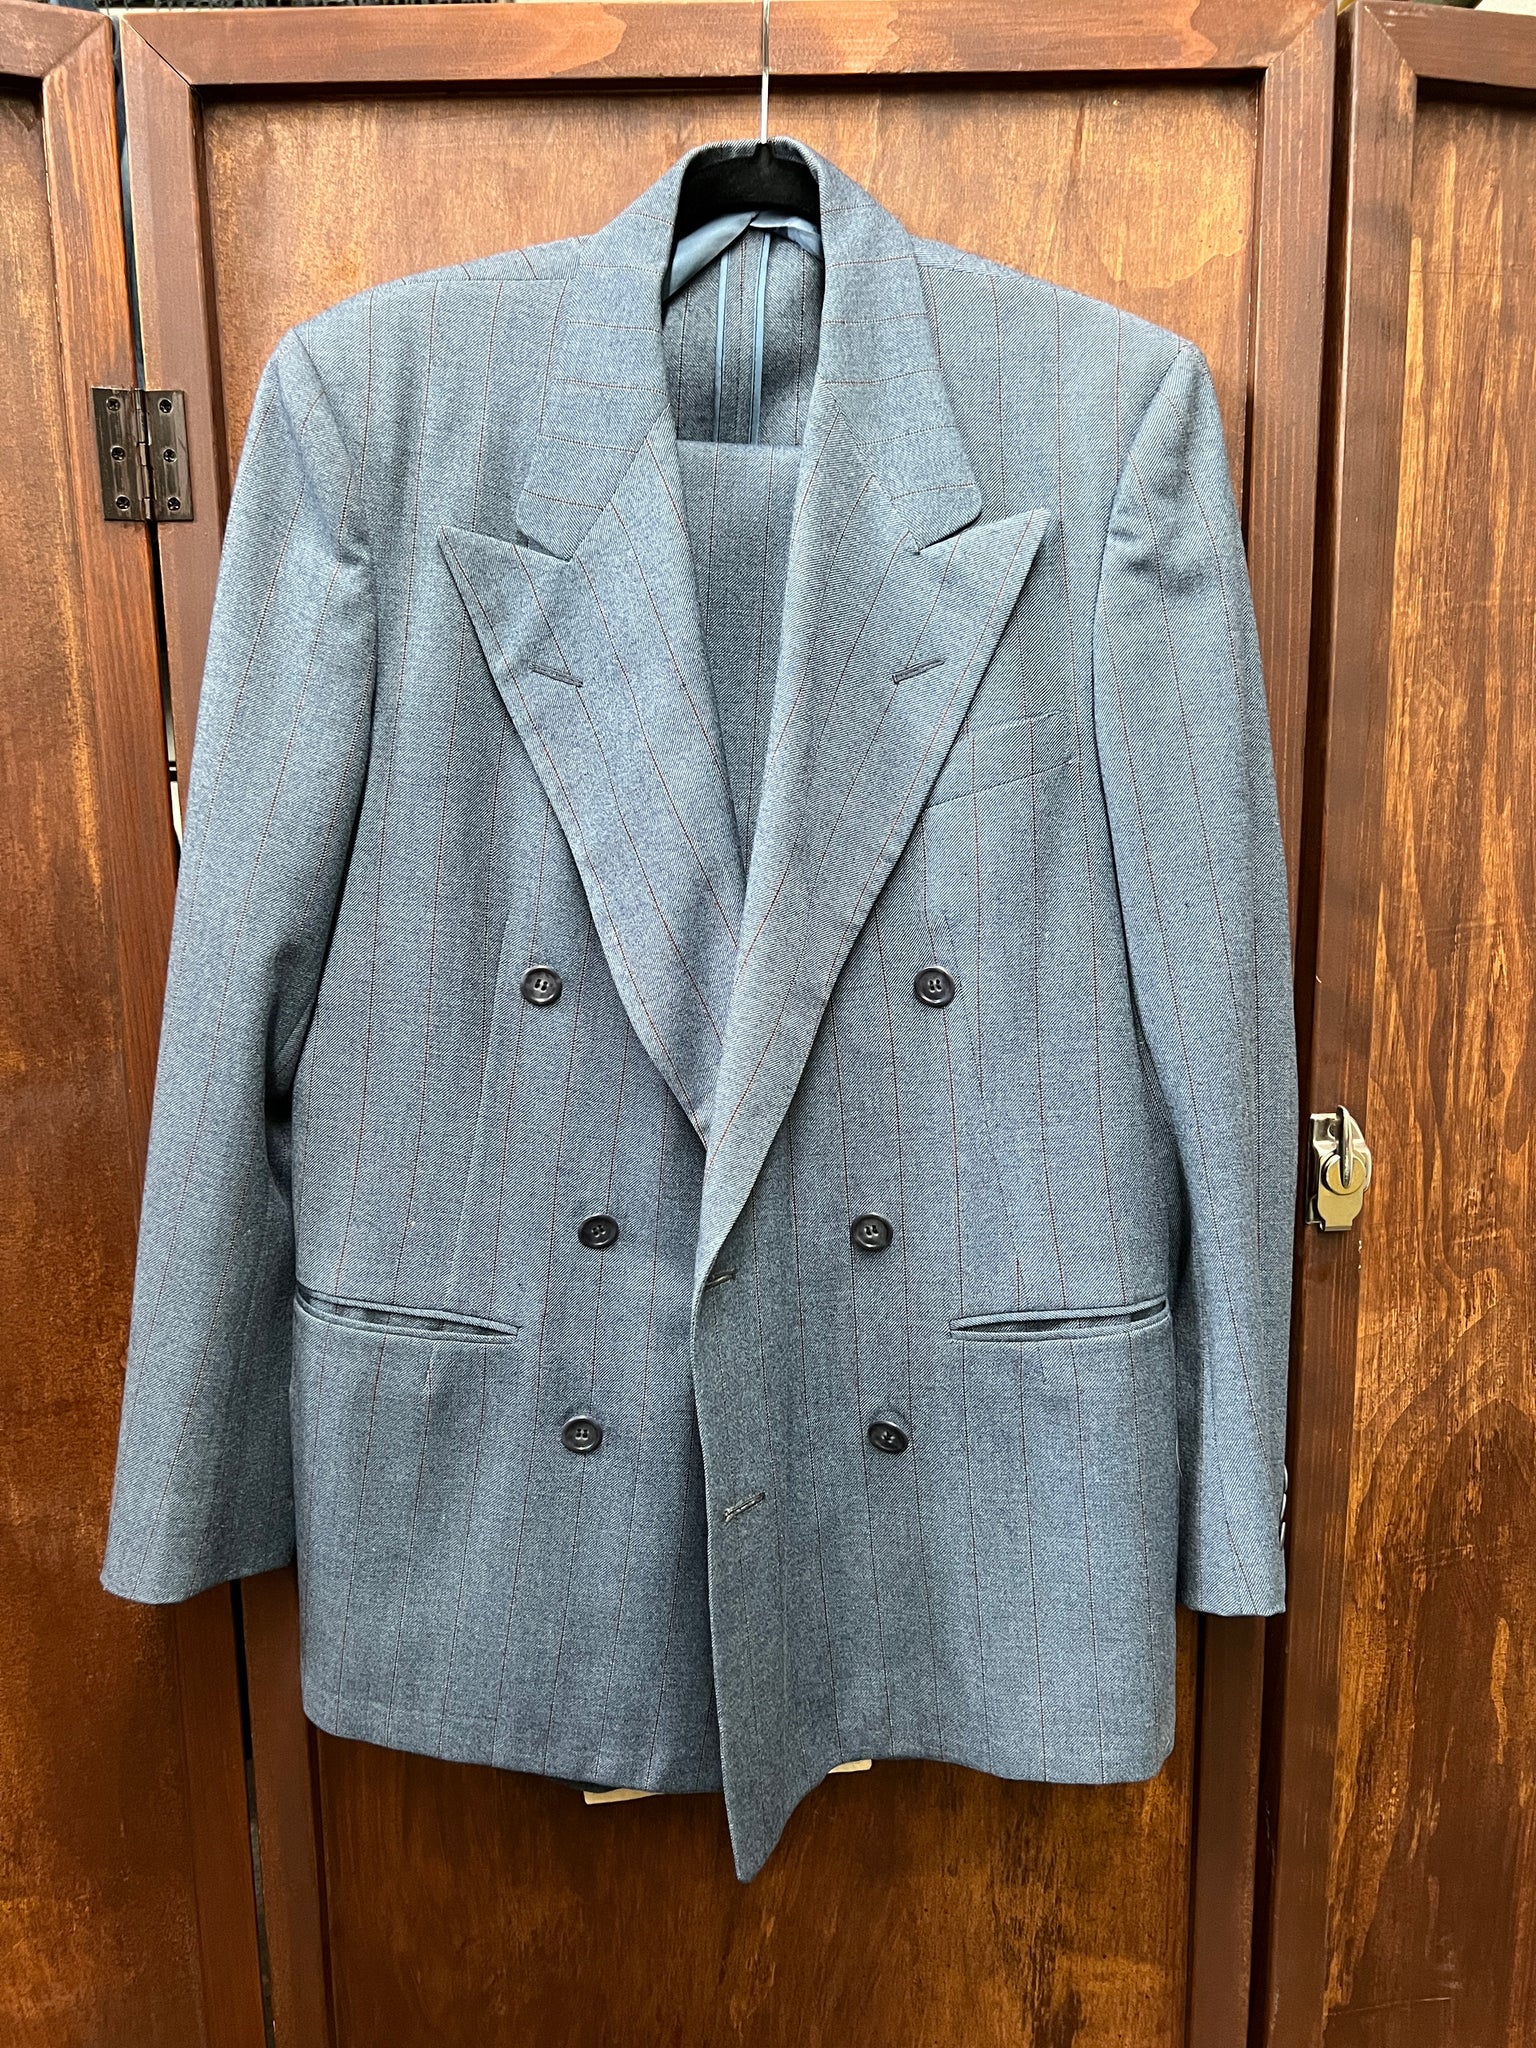 1950s MENS 2 PIECE- SUIT- Harris & Frank double breasted blue pinstripe